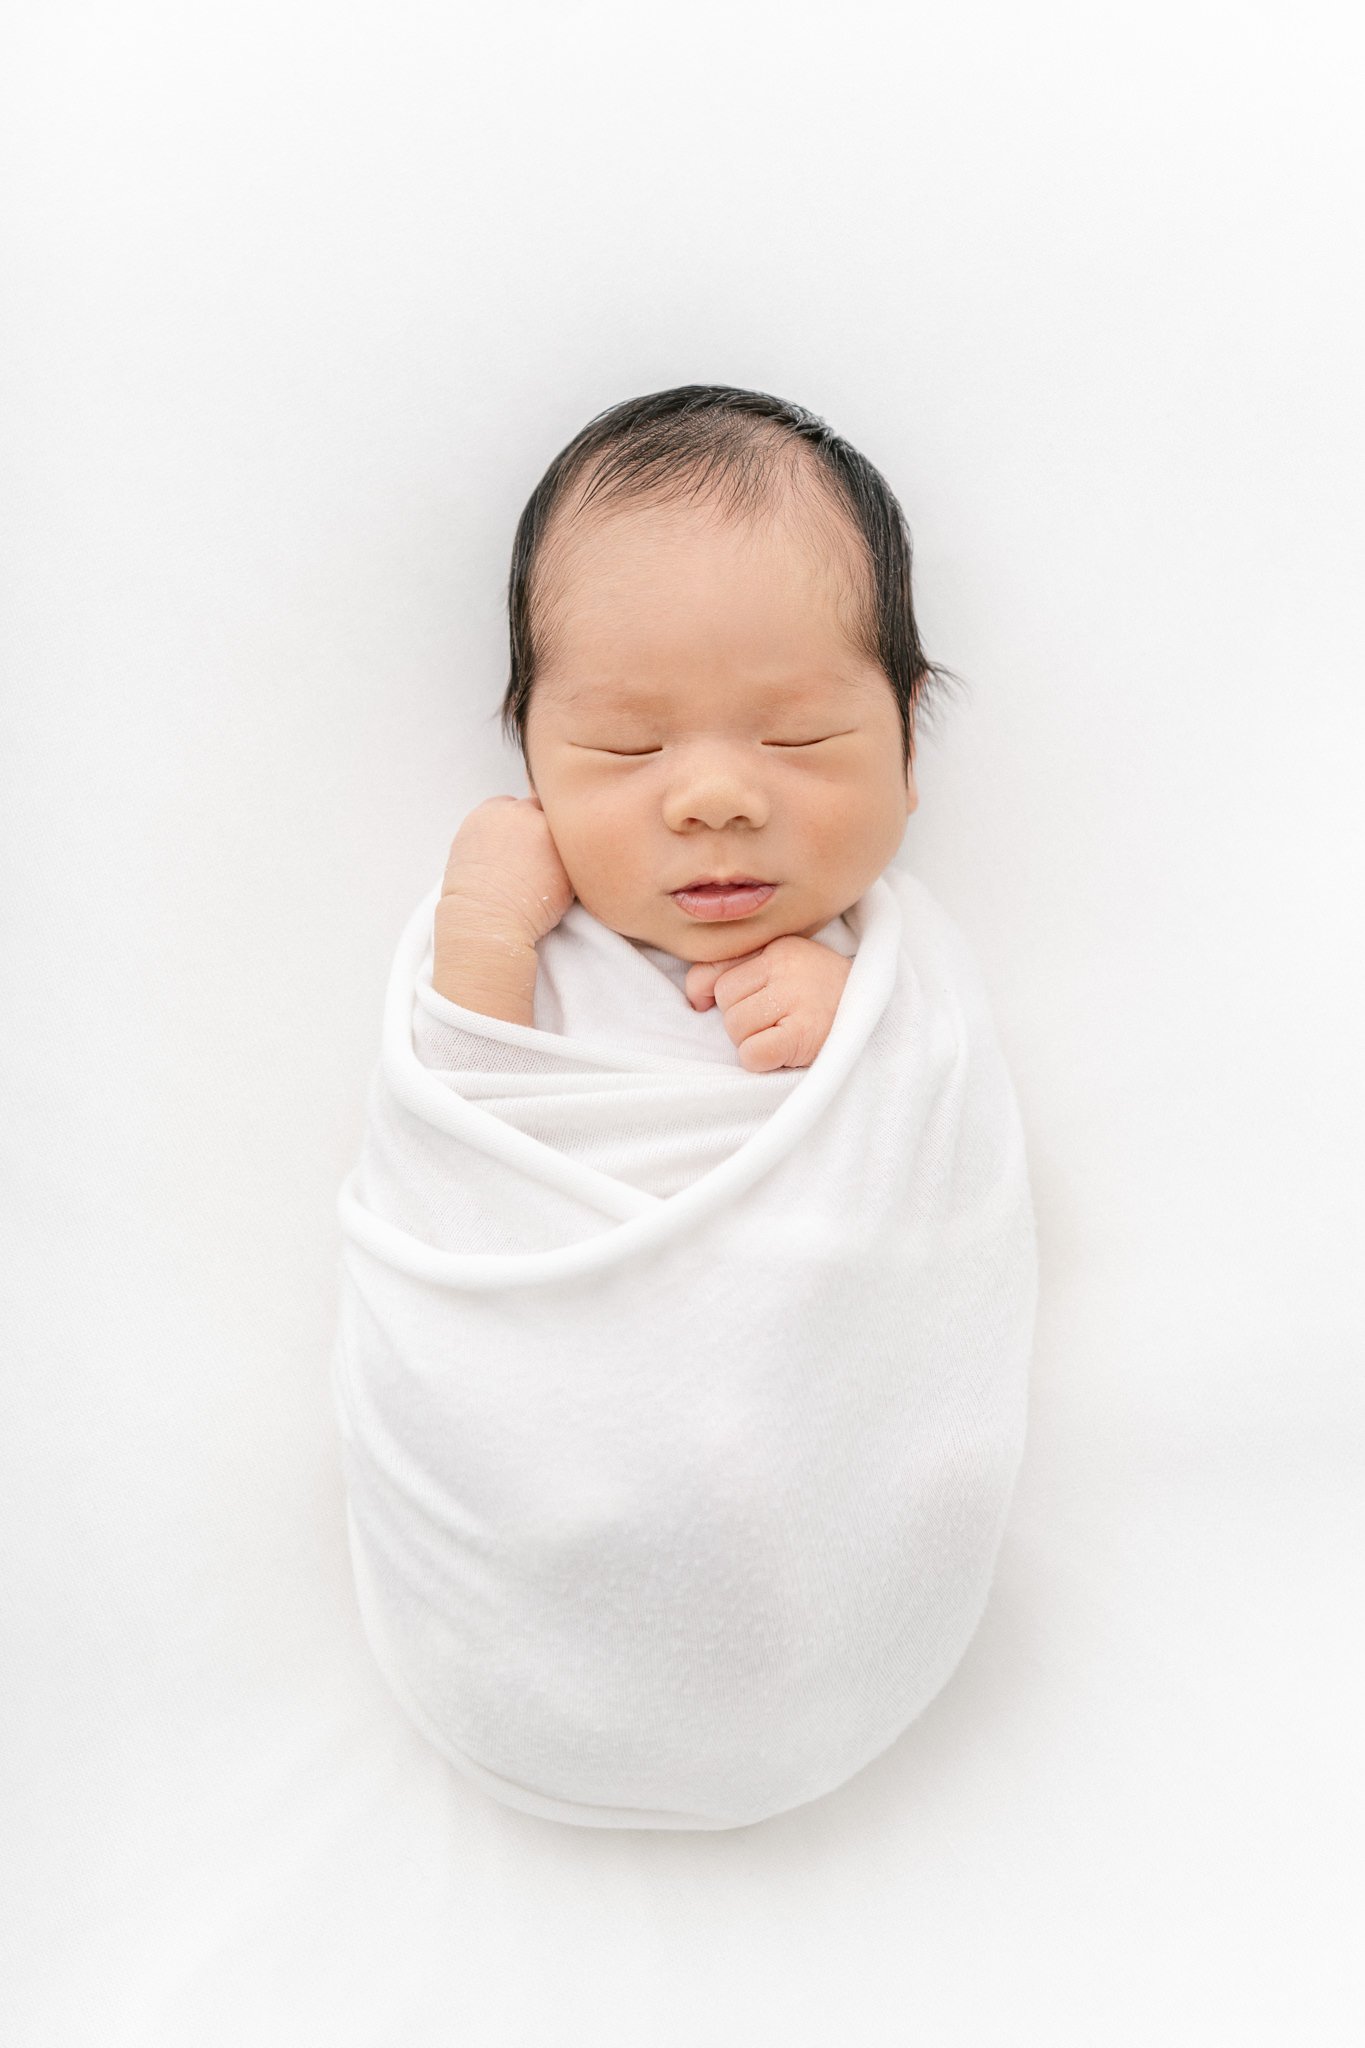  A swaddled newborn baby boy sleeps during an all white studio newborn session by Nicole Hawkins Photography. swaddled newborn portrait studio newborns East Coast #NicoleHawkinsPhotography #NicoleHawkinsNewborns #Babyboy #studionewbornsNJ #studionewb